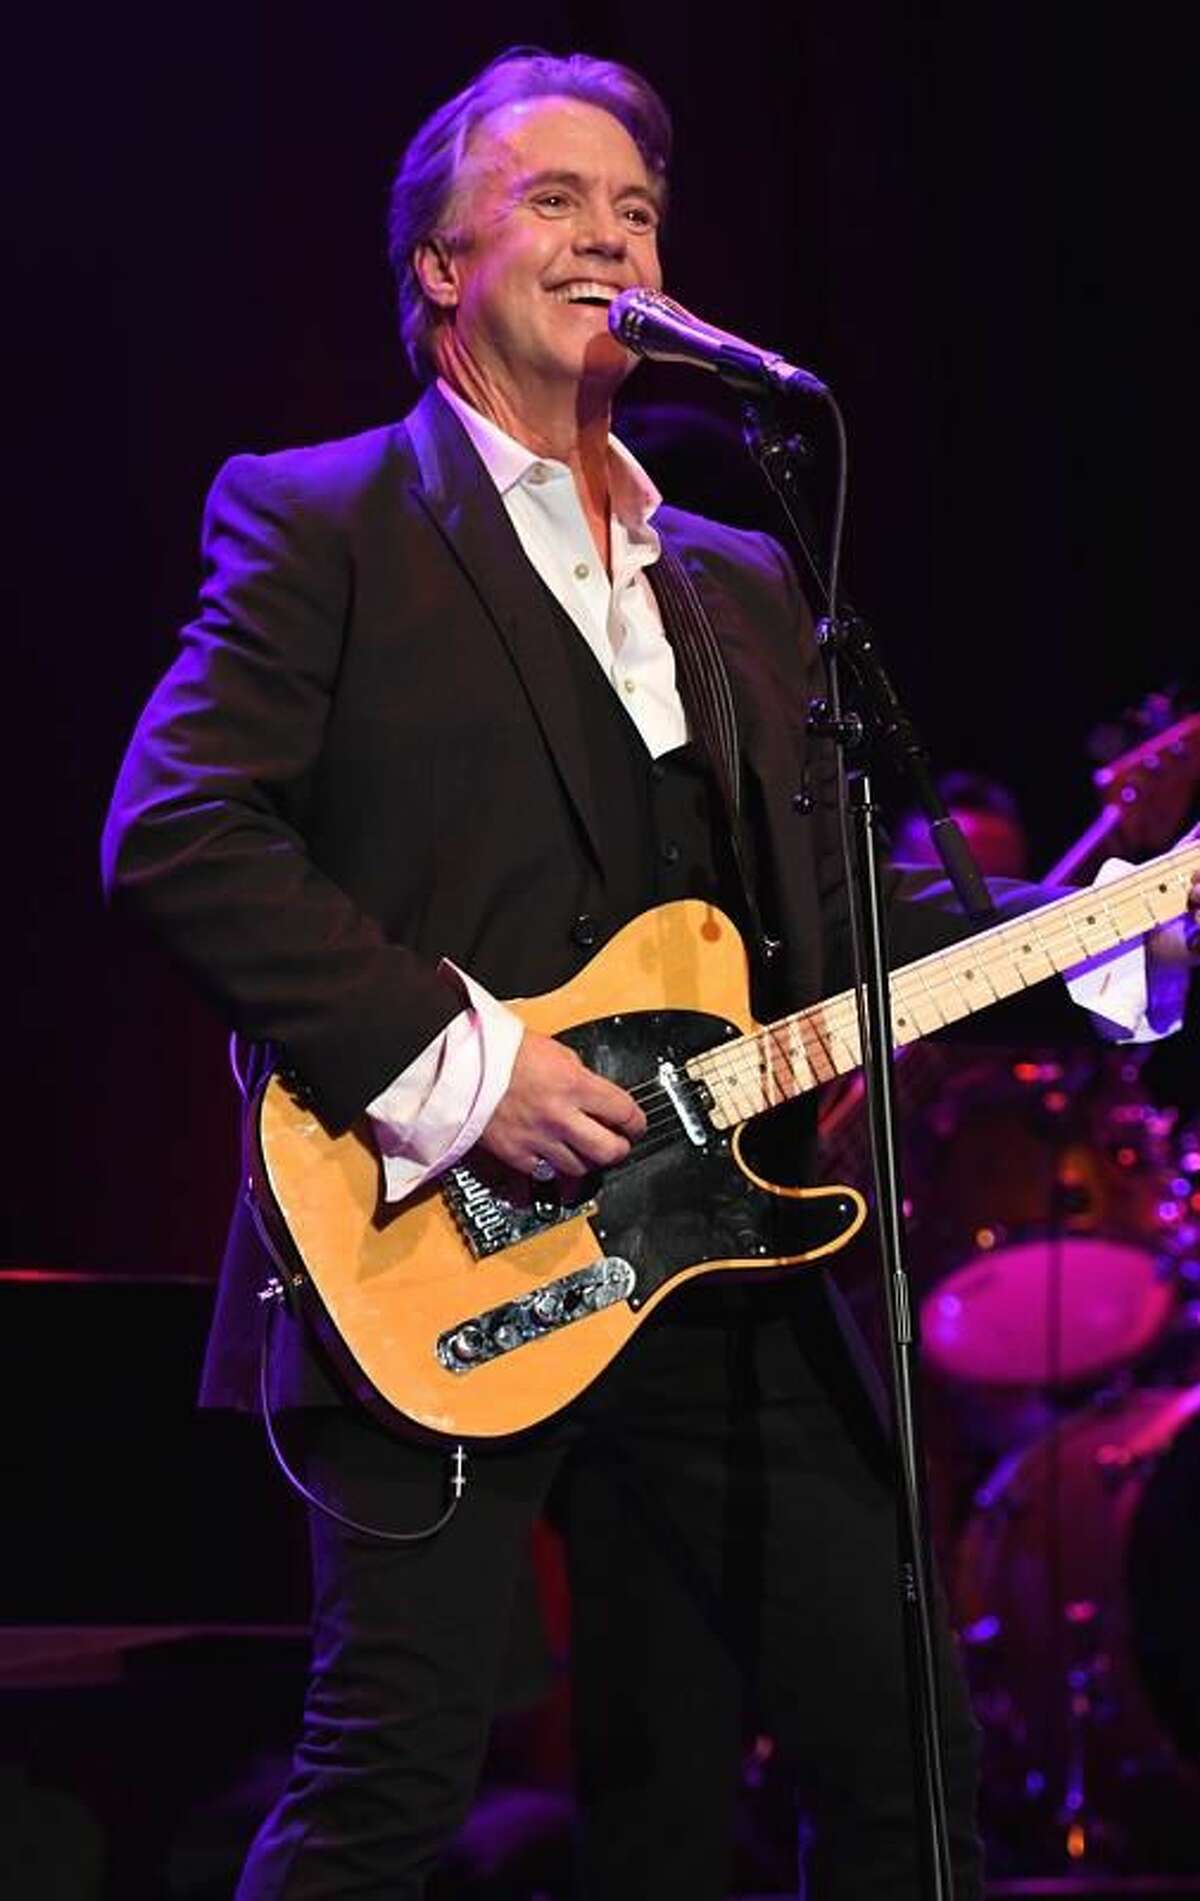 Singer, writer, actor and producer Shaun Cassidy is shown performing on stage during his “live” concert appearance at the Ridgefield Playhouse Aug. 5, 2019. The special show kicked off his first concert tour in nearly 40 years and attracted a sold out crowd of enthusiastic fans that enjoyed every minute of his performance. Cassidy starred in the television series “The Hardy Boys Mysteries” and “Breaking Away.” In the 1980s and ’90s, Cassidy worked almost exclusively as an actor in the theater, performing on Broadway. Since the mid-1990s, Cassidy has been a writer and producer in television, creating and producing a number of television series, including “American Gothic,” “Roar” and “Invasion.” He is currently the consulting producer on NBC’s medical drama “New Amsterdam” and “Blue Bloods.” Cassidy is the eldest son of Academy Award winning actress Shirley Jones and Tony Award winning actor Jack Cassidy. His older half-brother was David Cassidy of Partridge Family fame.